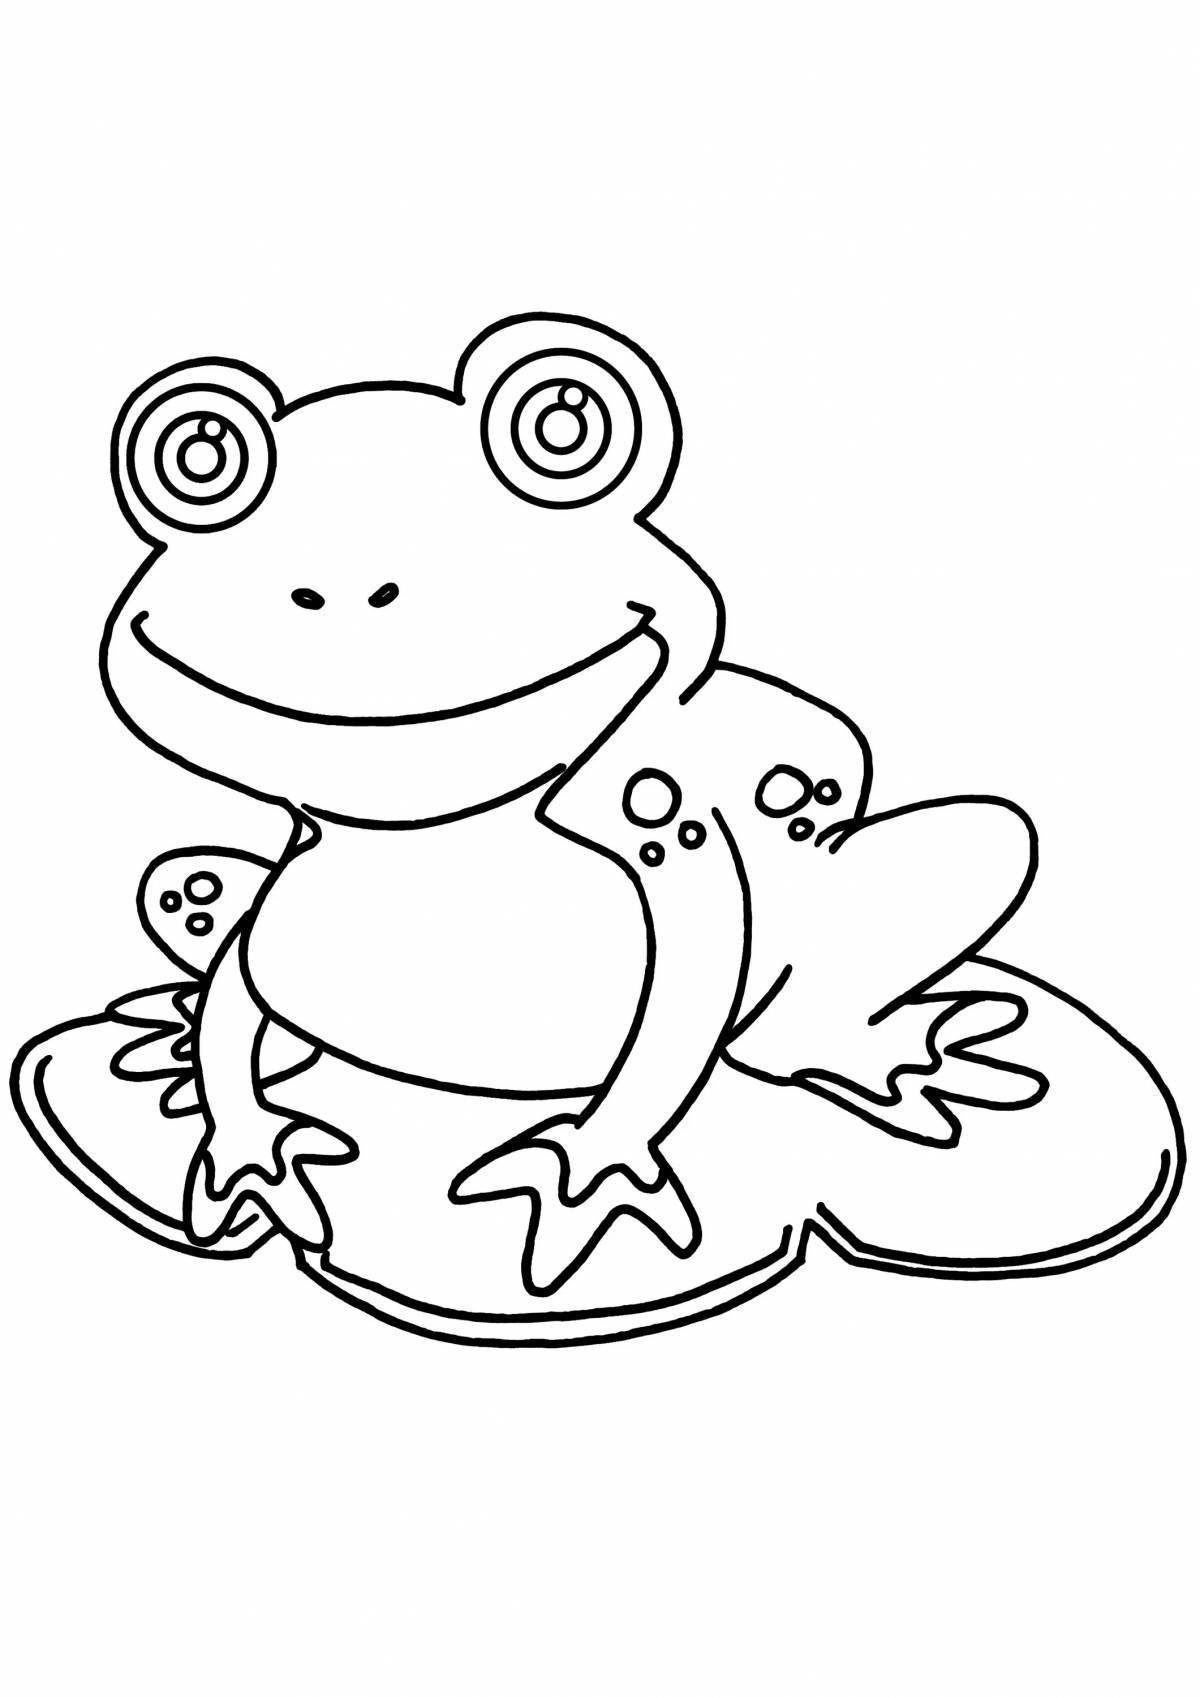 Blessed kawaii frog coloring book